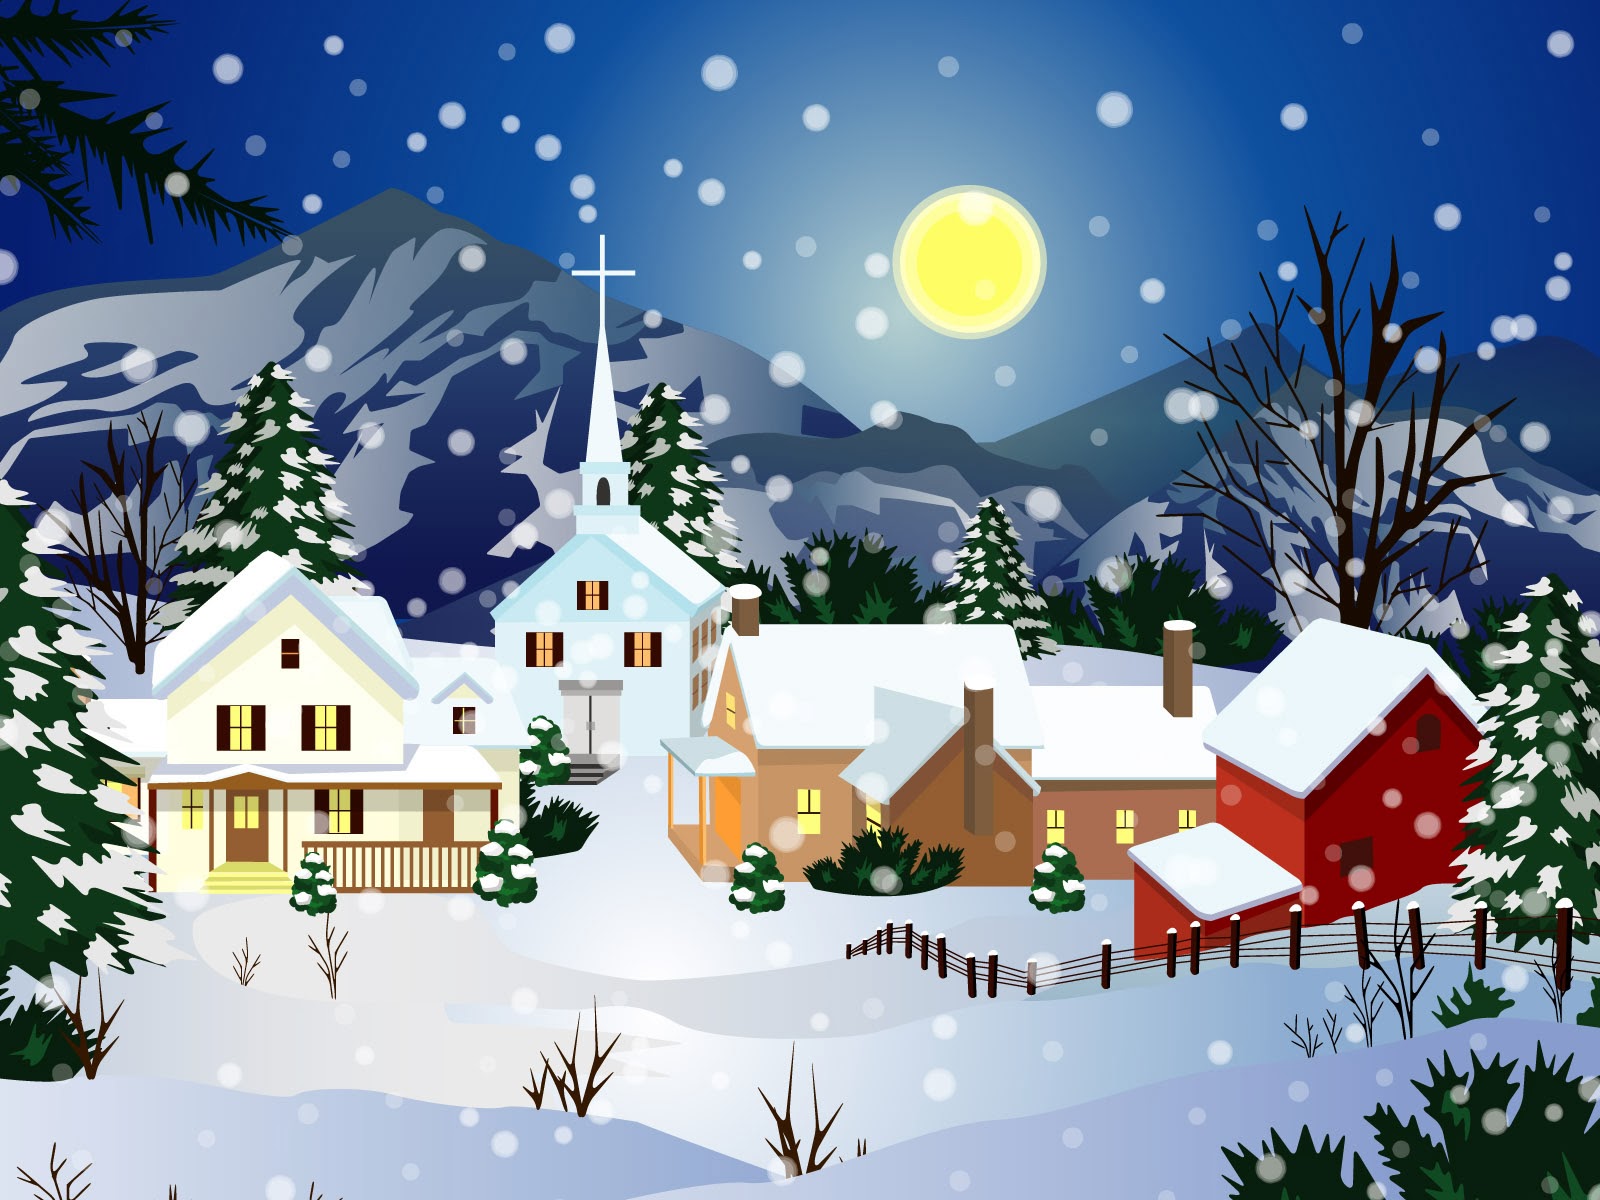 Sfondi Natalizi Per Android.Free Download Sfondi Natalizi Per Tablet Android Christmas Wallpaper For Android 1600x1200 For Your Desktop Mobile Tablet Explore 46 Christmas Tablet Wallpaper Free Wallpaper For Android Wallpapers For Android